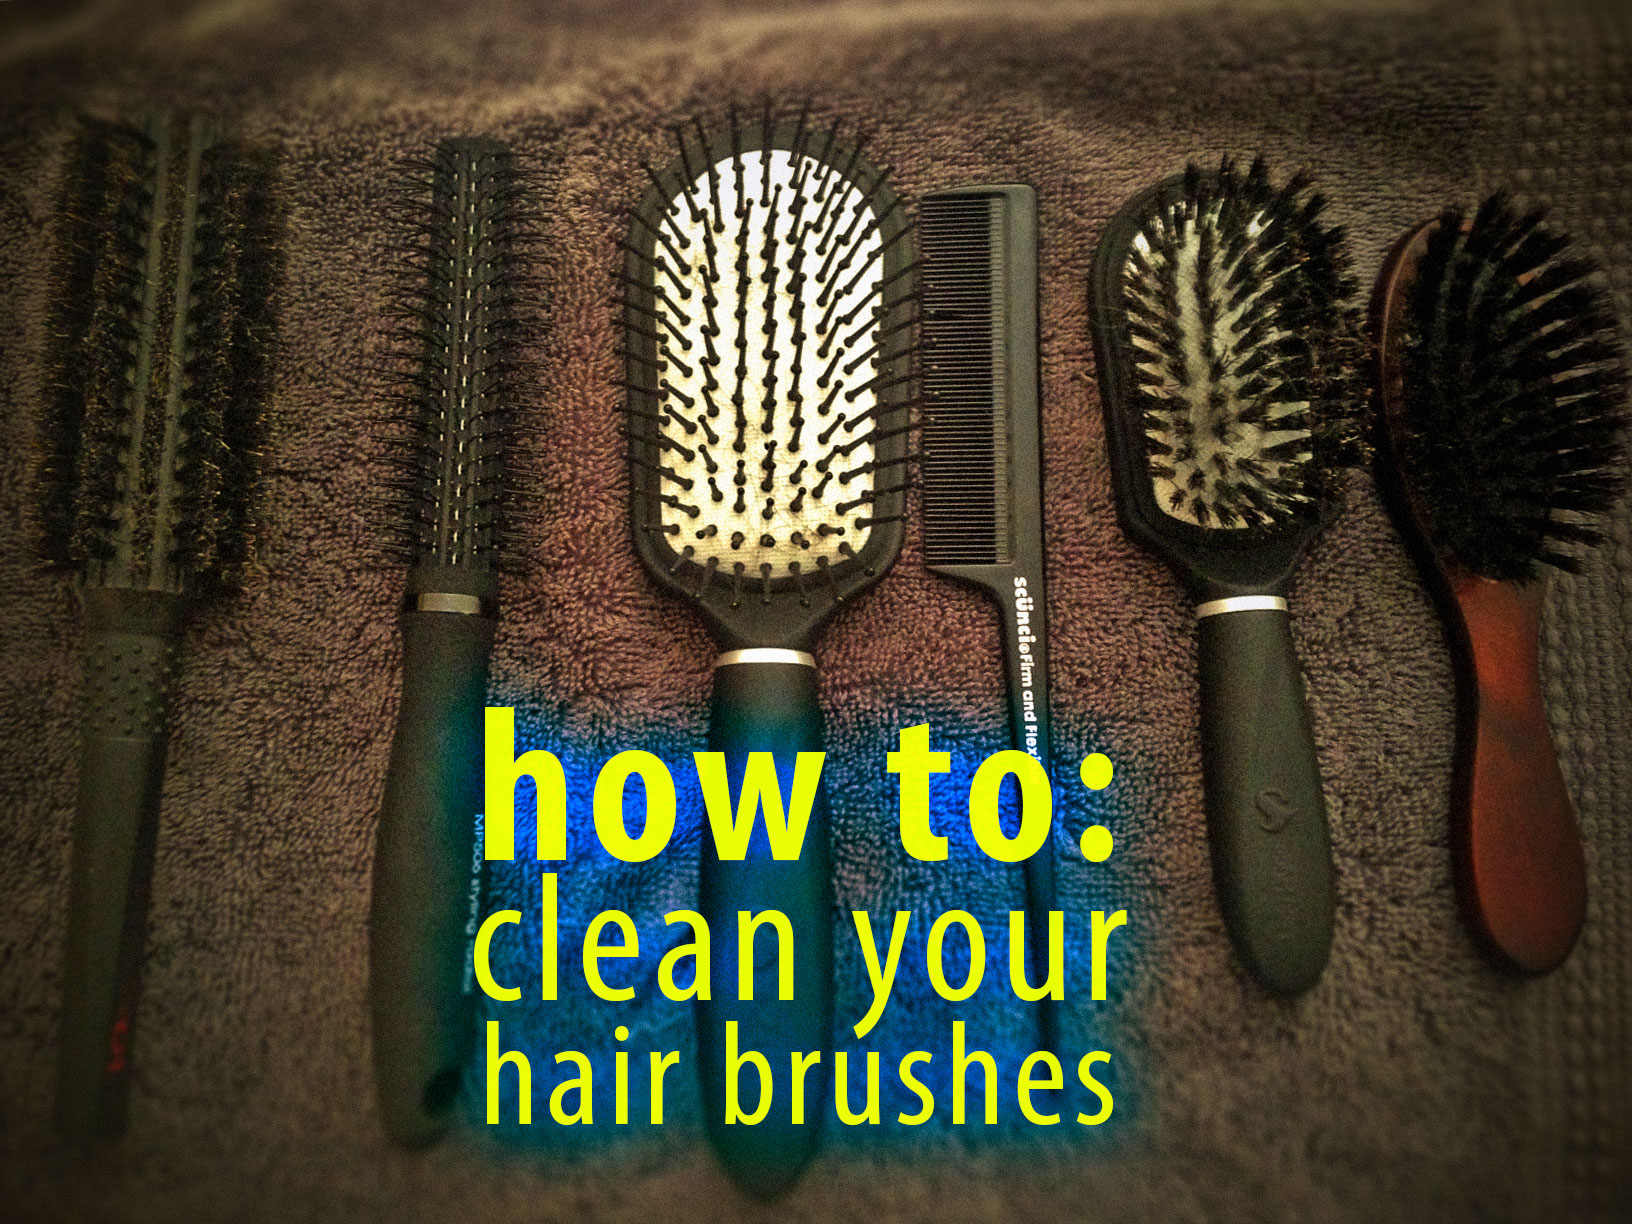 Tip: How to Clean Your Hairbrushes